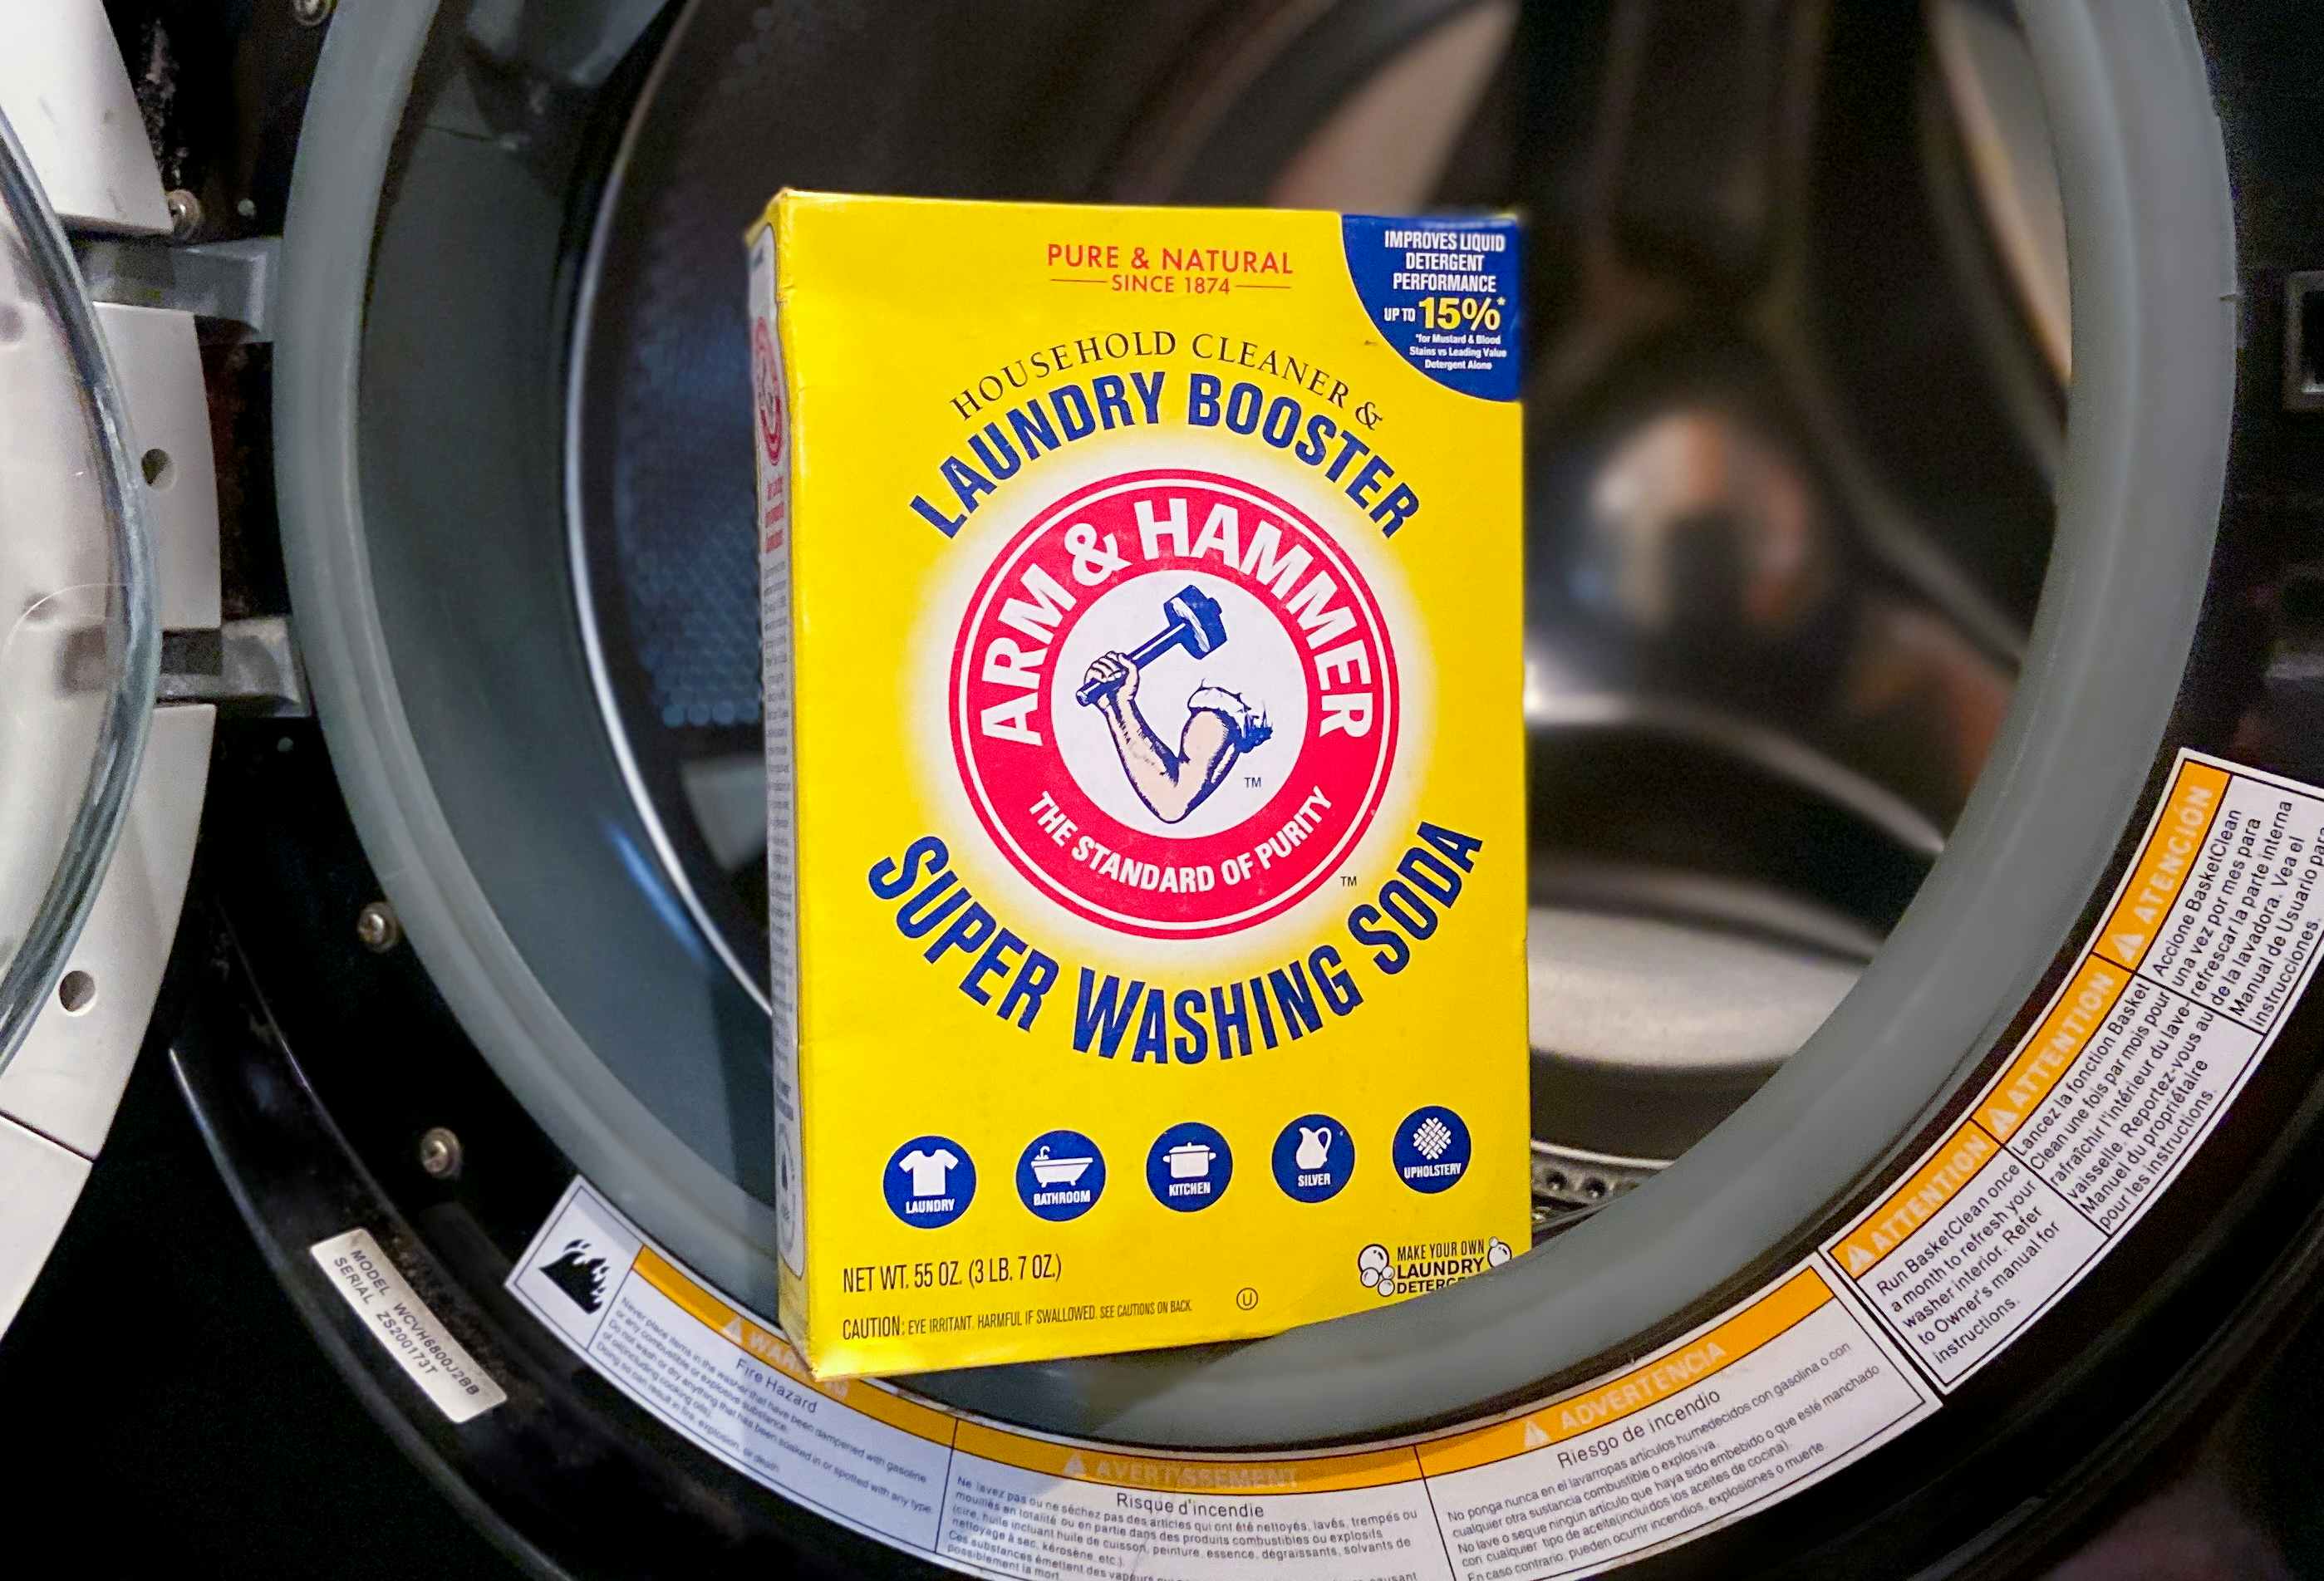 arm and hammer laundry booster super washing soda resting in a washing machine